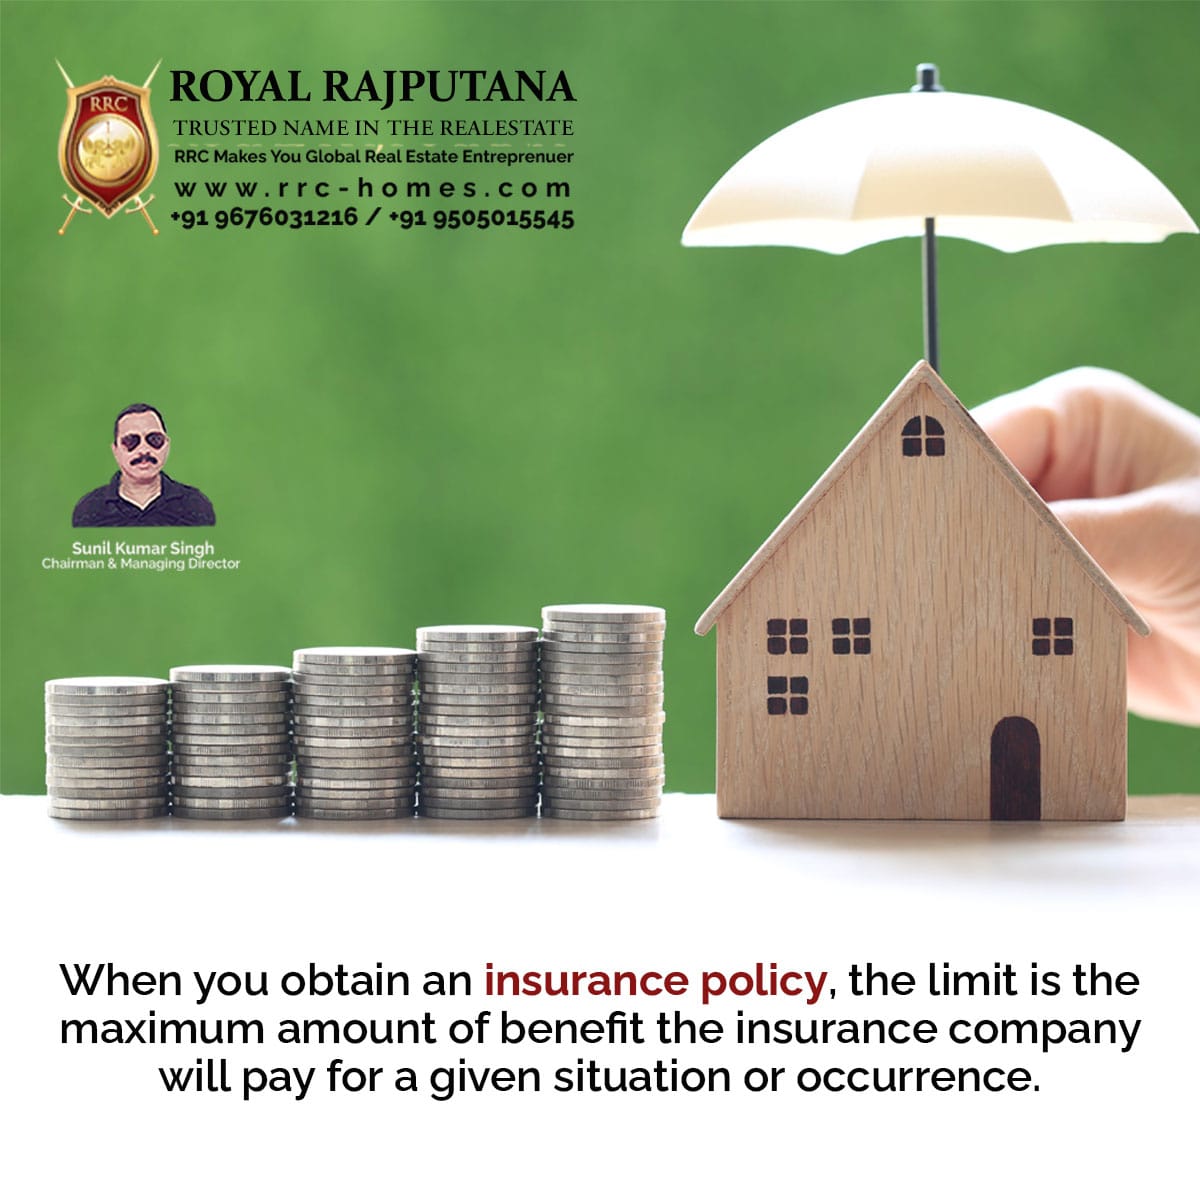 When you obtain an insurance policy, the limit is the maximum amout of benefit the insurance company will pay for a given situation or occurence.

#royalrajputana #royalrajputanahomes #rrc #rrchomes #quote #positive #negative #situation #insurance #policy #limit #amount #company